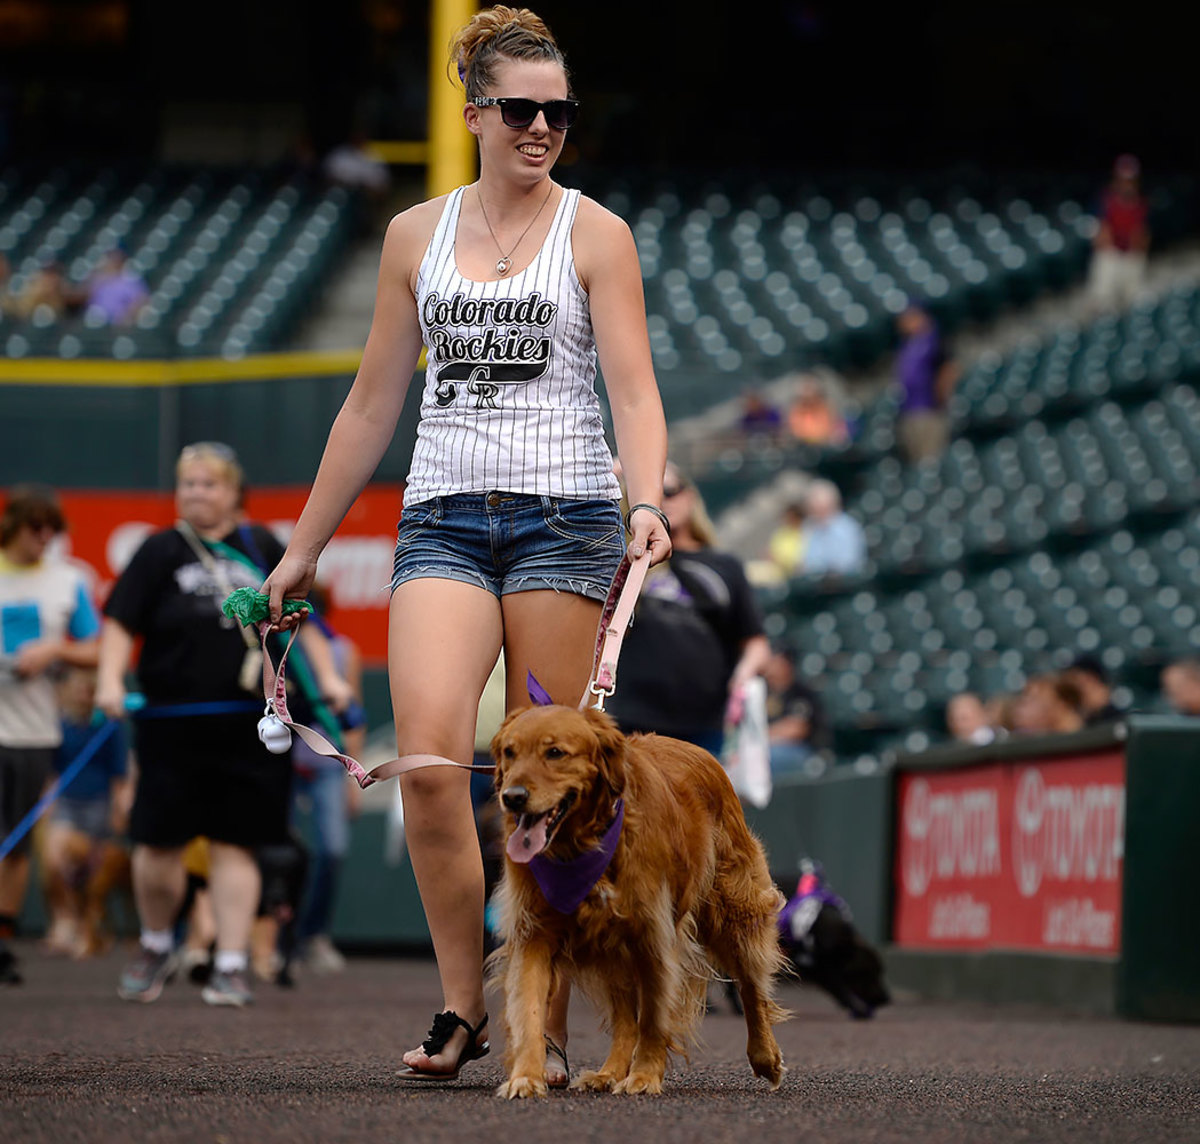 Colorado-Rockies-Bark-at-the-Park-dogs-GettyImages-590515756_master.jpg